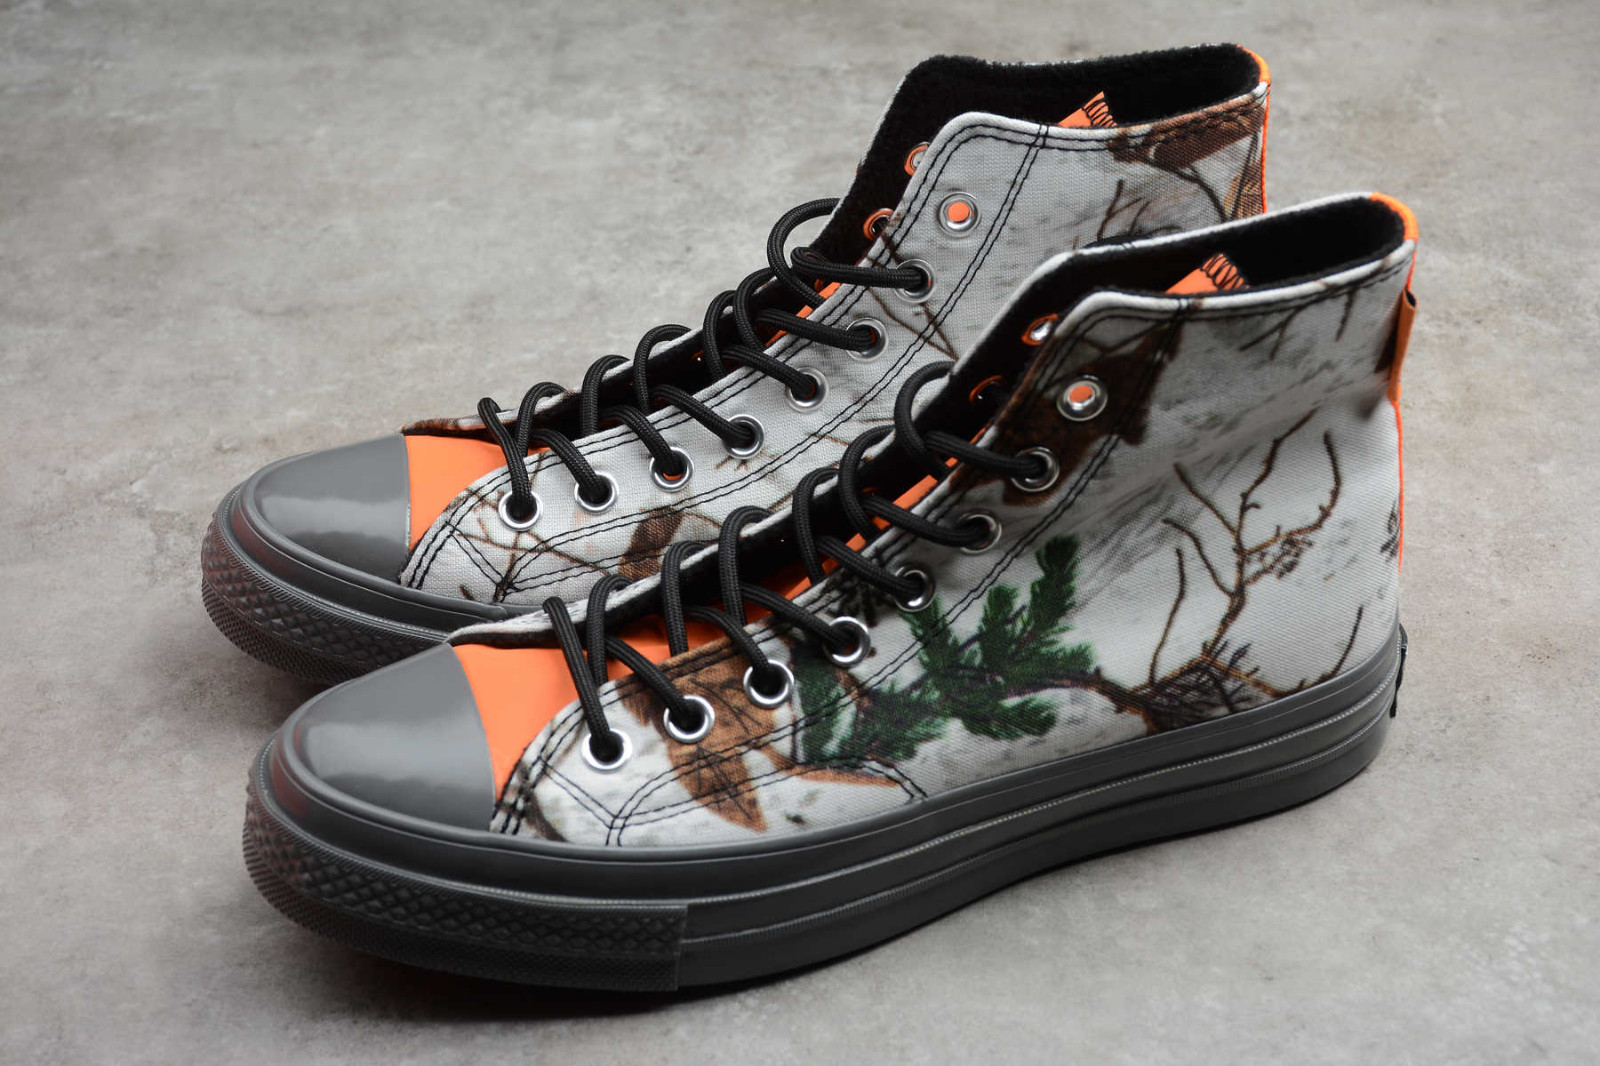 Converse Taylor All Star 70 High GORE-TEX White Flash Orange 169365C - MultiscaleconsultingShops